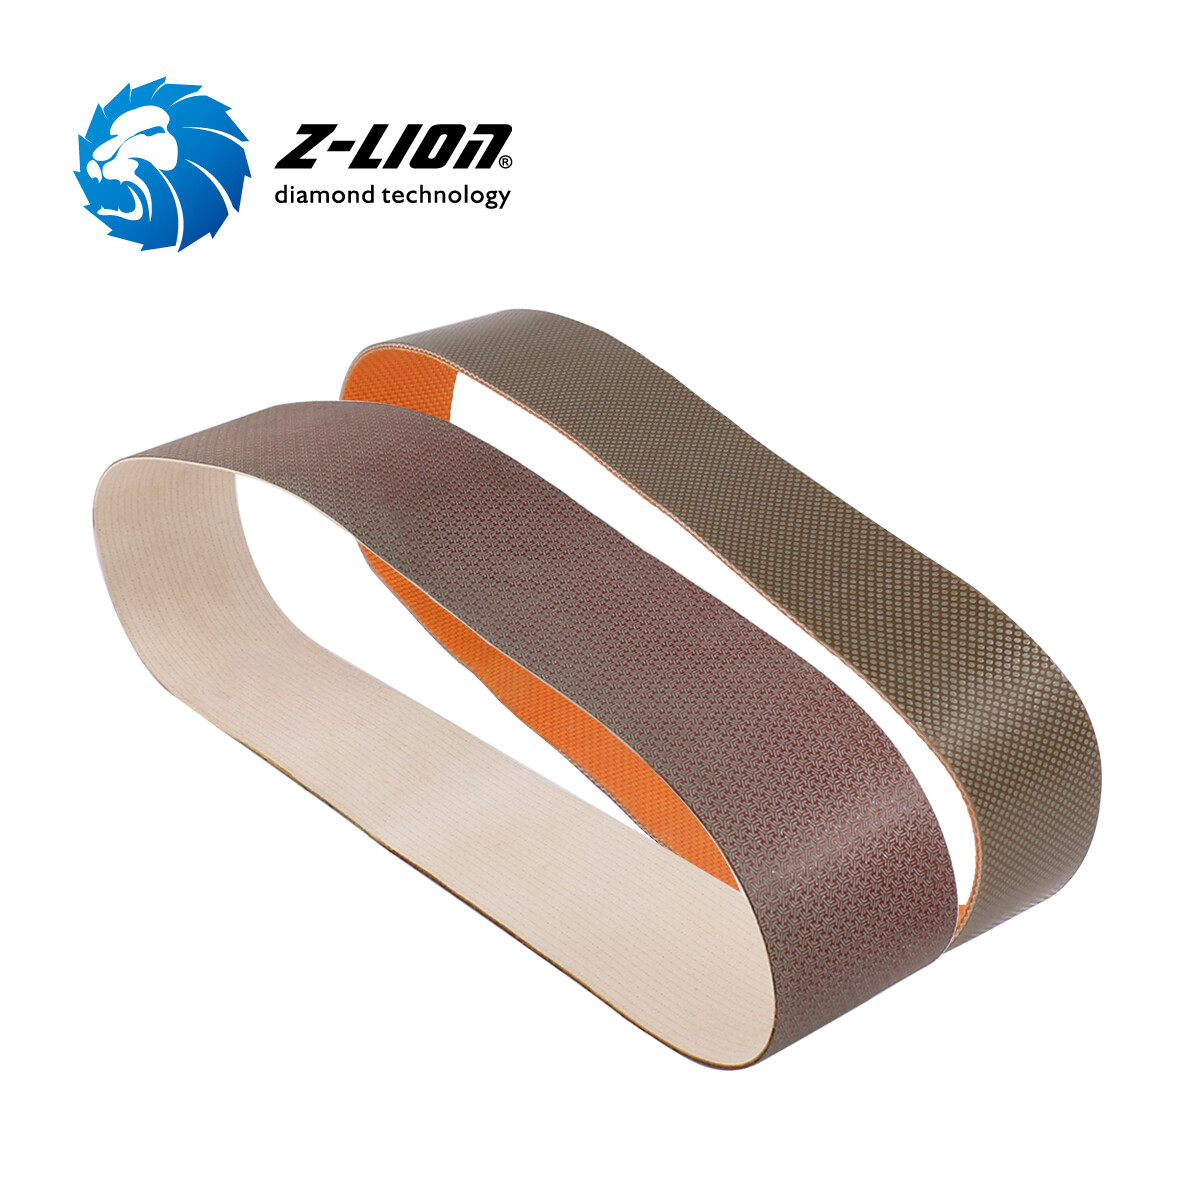 ZL-EB Electroplated Diamond Abrasives Belts for Glass Stone Ceramic Metal Grinding